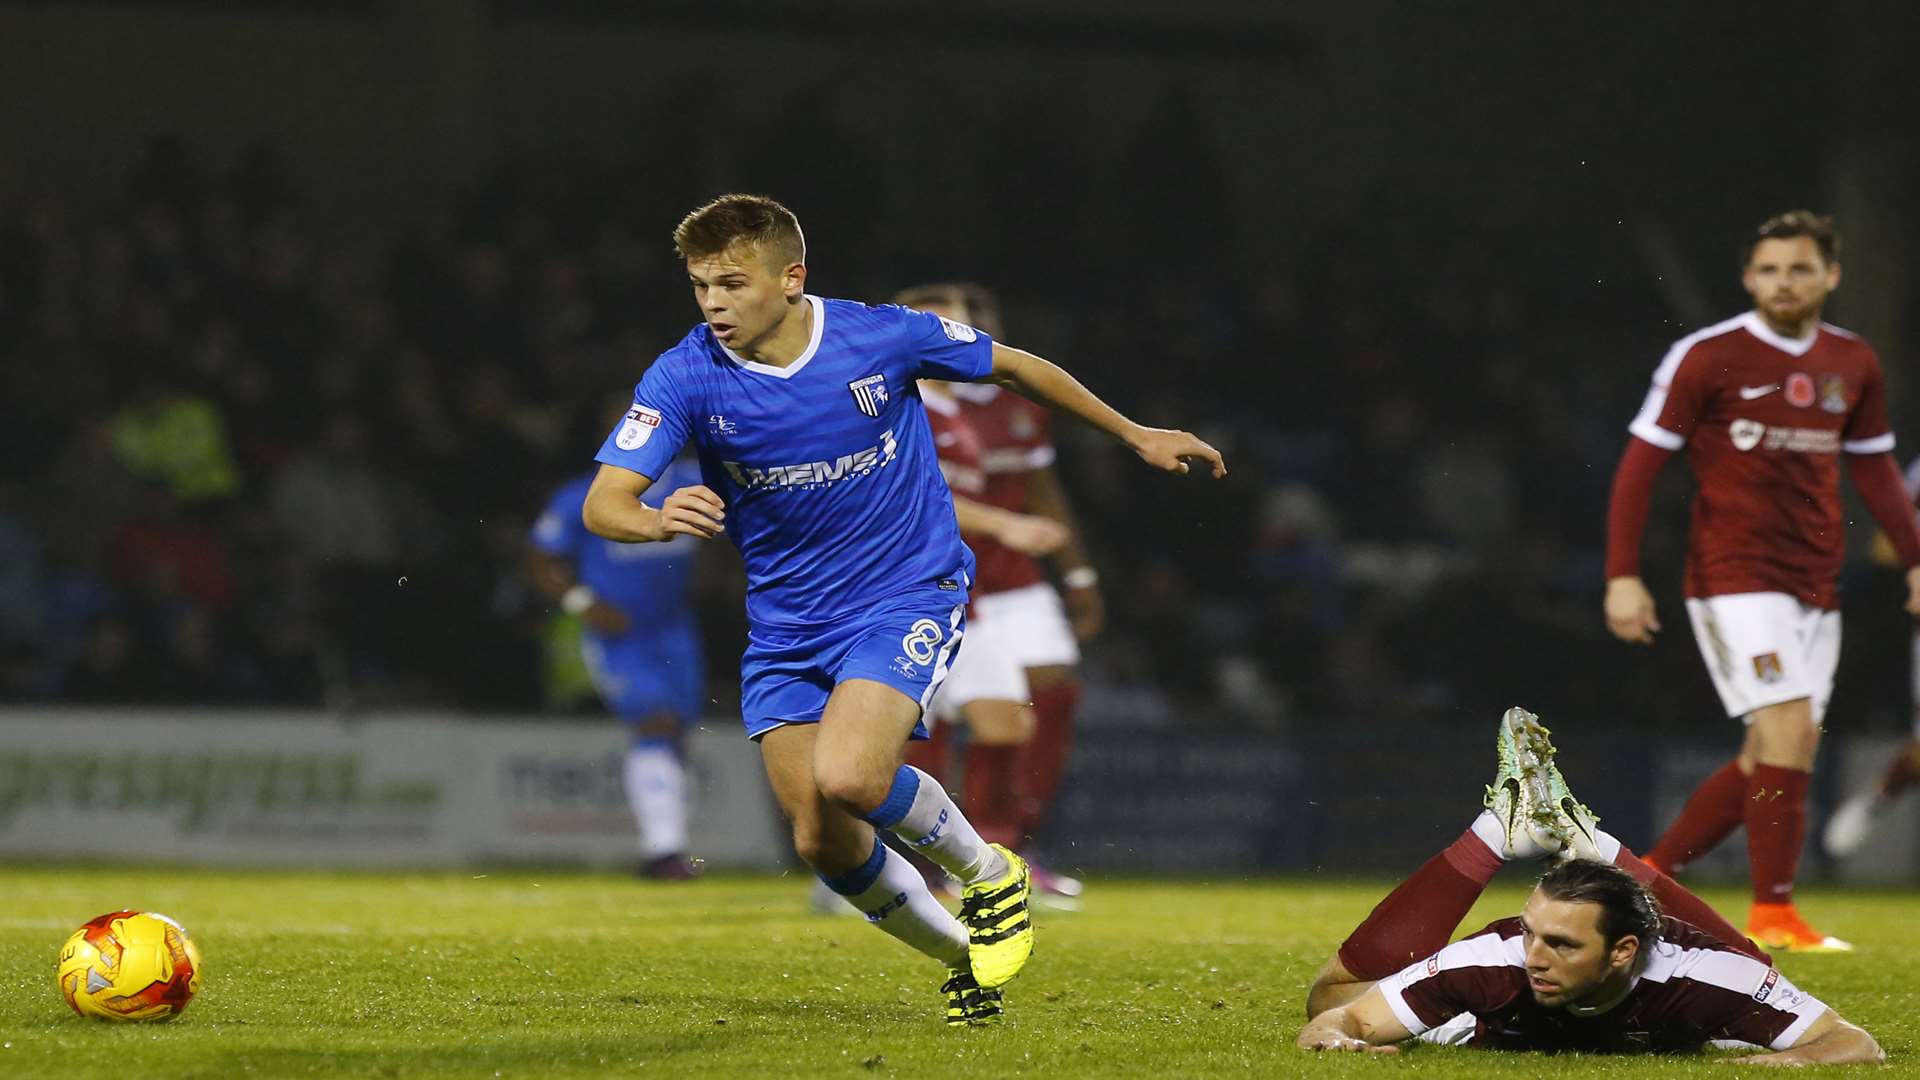 Jake Hessenthaler leaves his man grounded Picture: Andy Jones